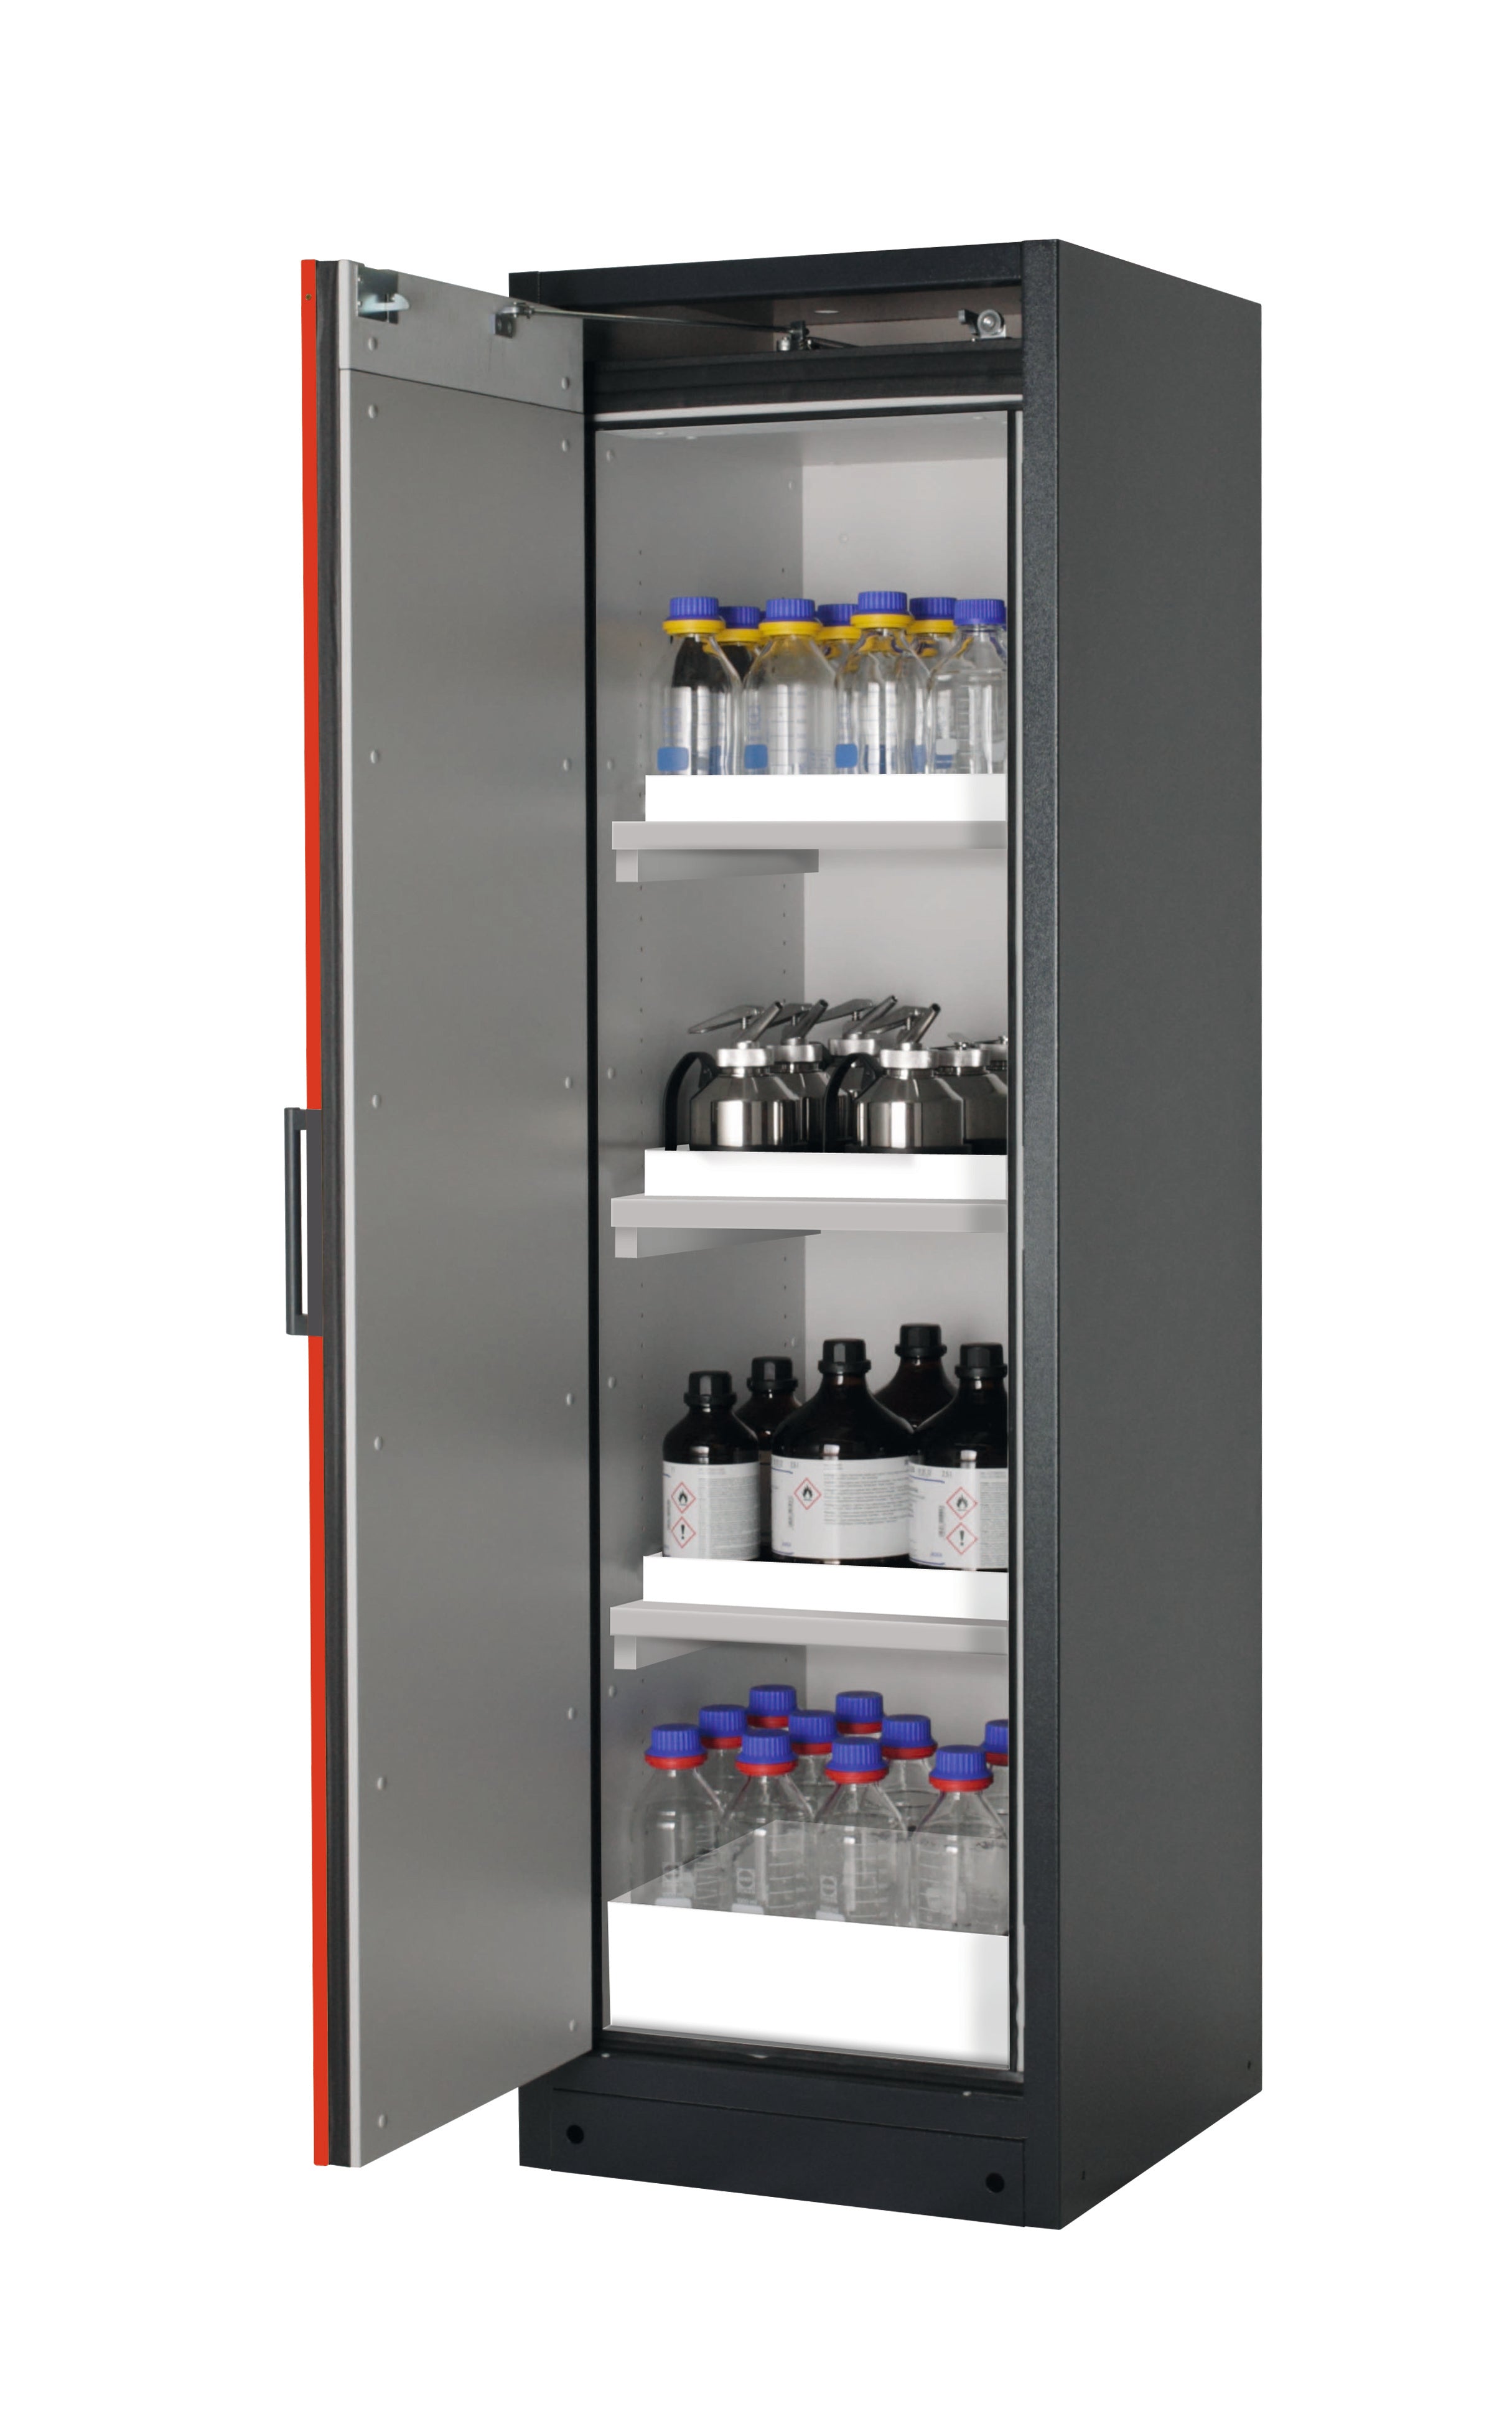 Type 90 safety storage cabinet Q-PEGASUS-90 model Q90.195.060.WDAC in traffic red RAL 3020 with 3x tray shelf (standard) (polypropylene),